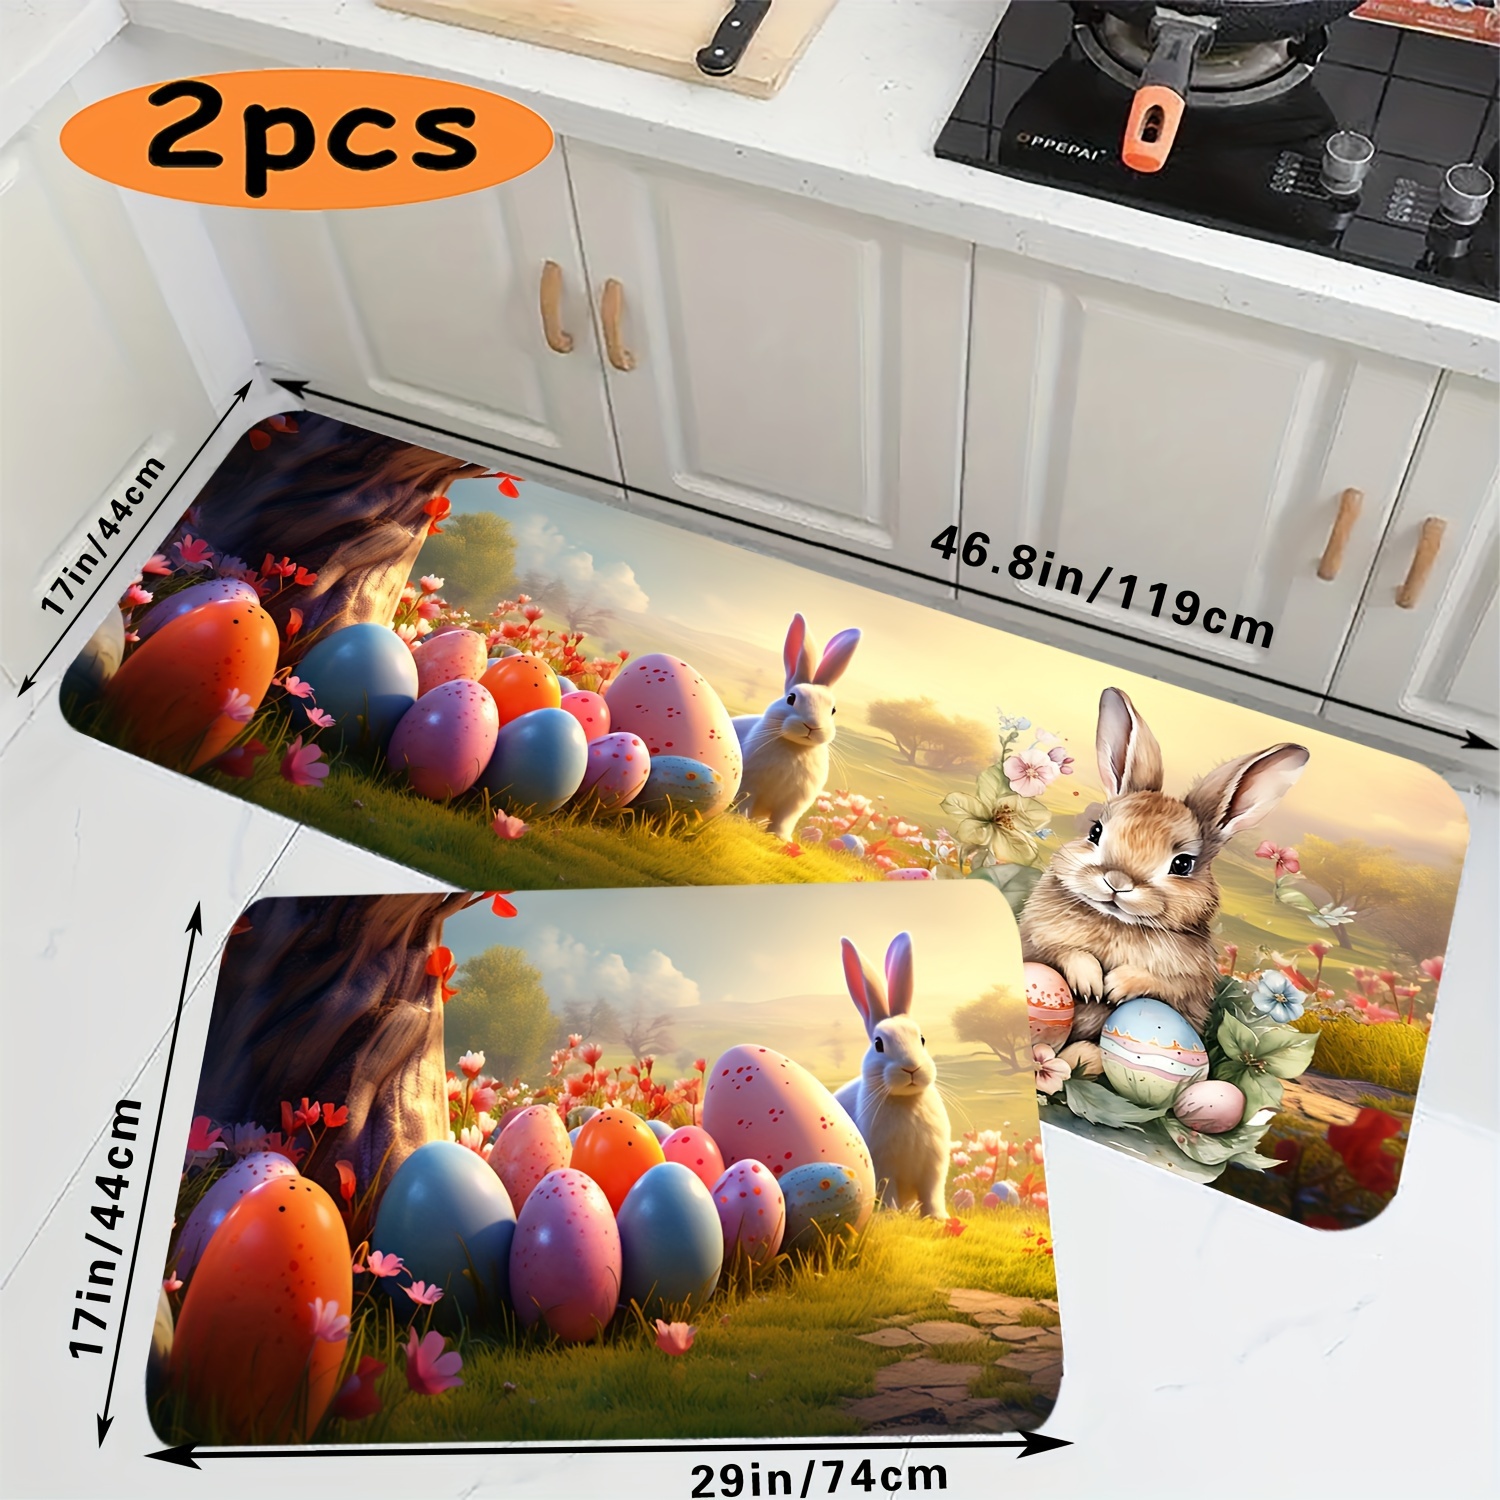 

2pcs Colorful Easter Eggs Non Slip Bathroom Rugs, Decorative Bunny Pattern Cushioned Kitchen Foot Pad, Washable Absorbent Doorway Welcome Mat, Room Accessories, Home Decor, Happy Easter Day Decor